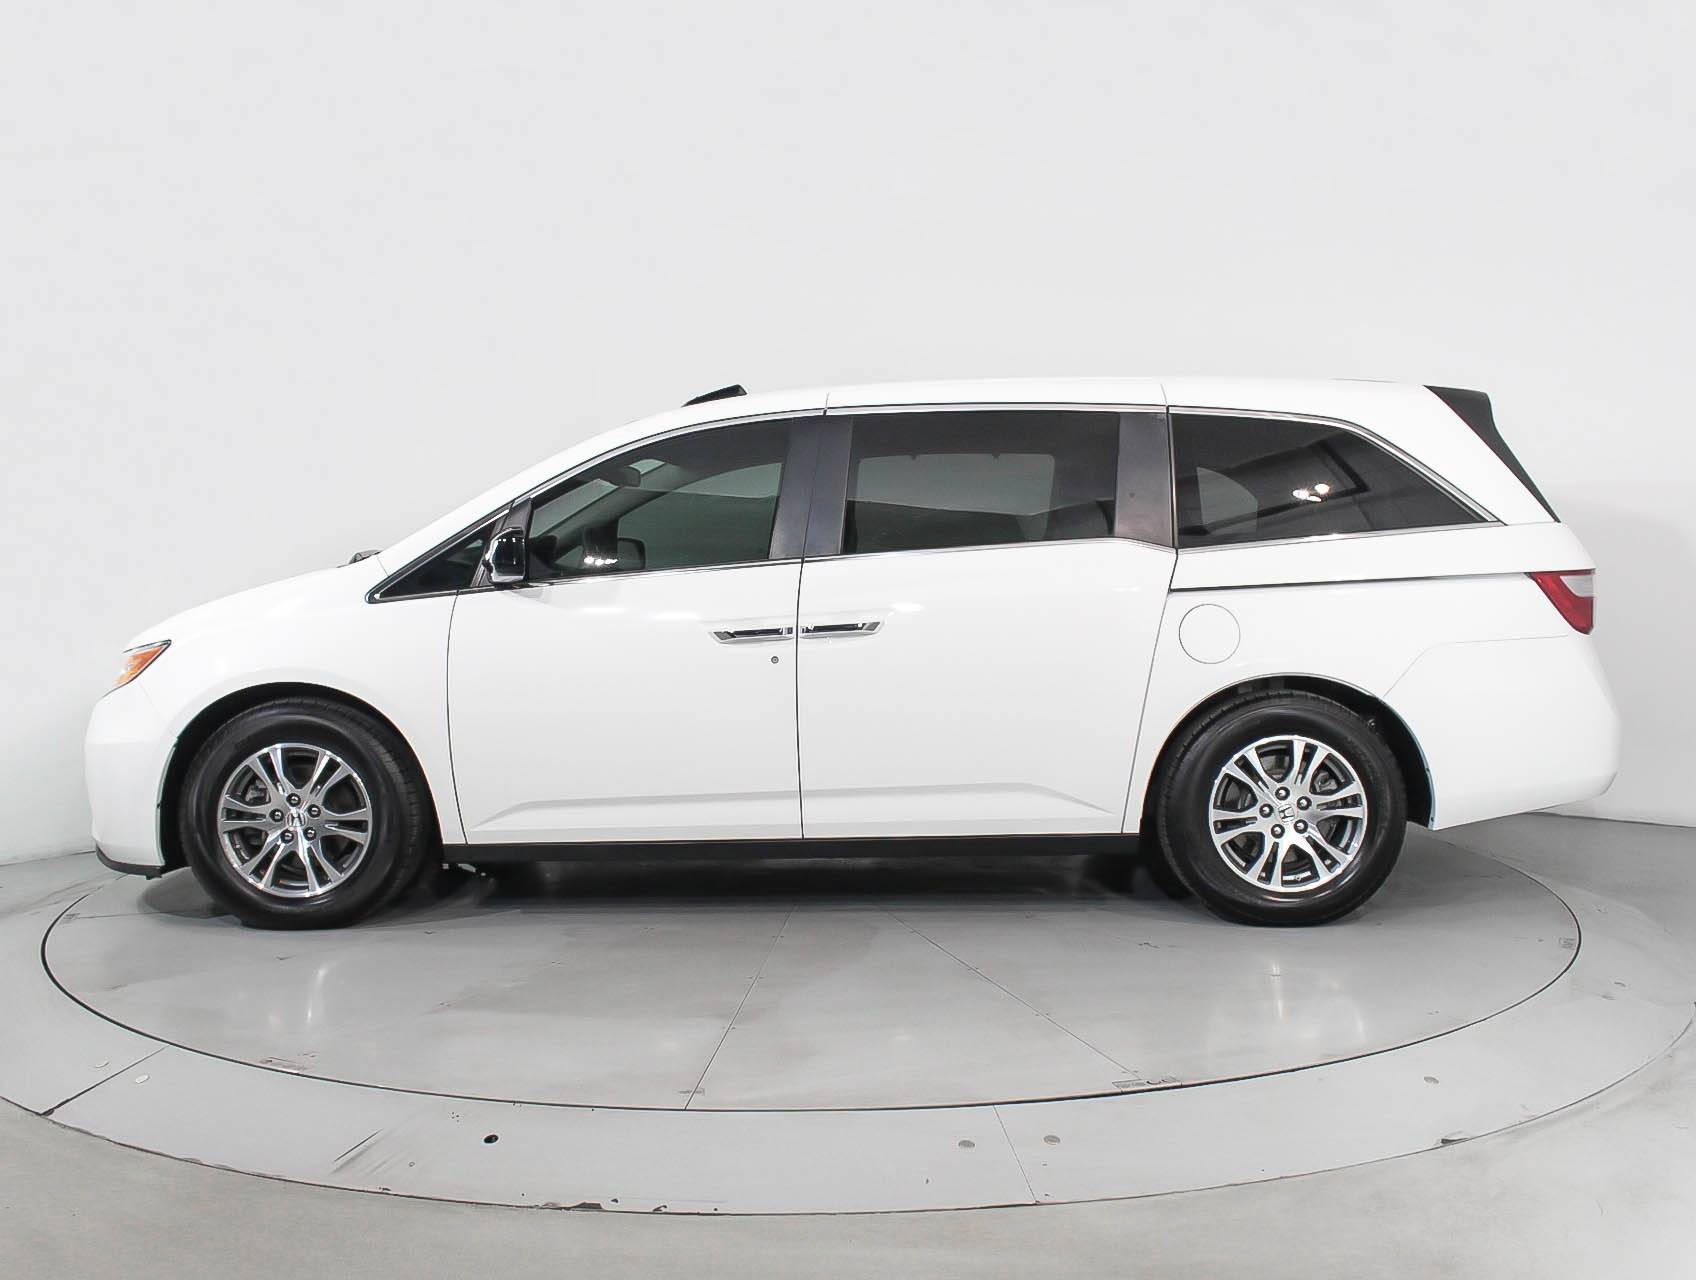 Used 2013 HONDA ODYSSEY EX-L for sale in HOLLYWOOD | 91062